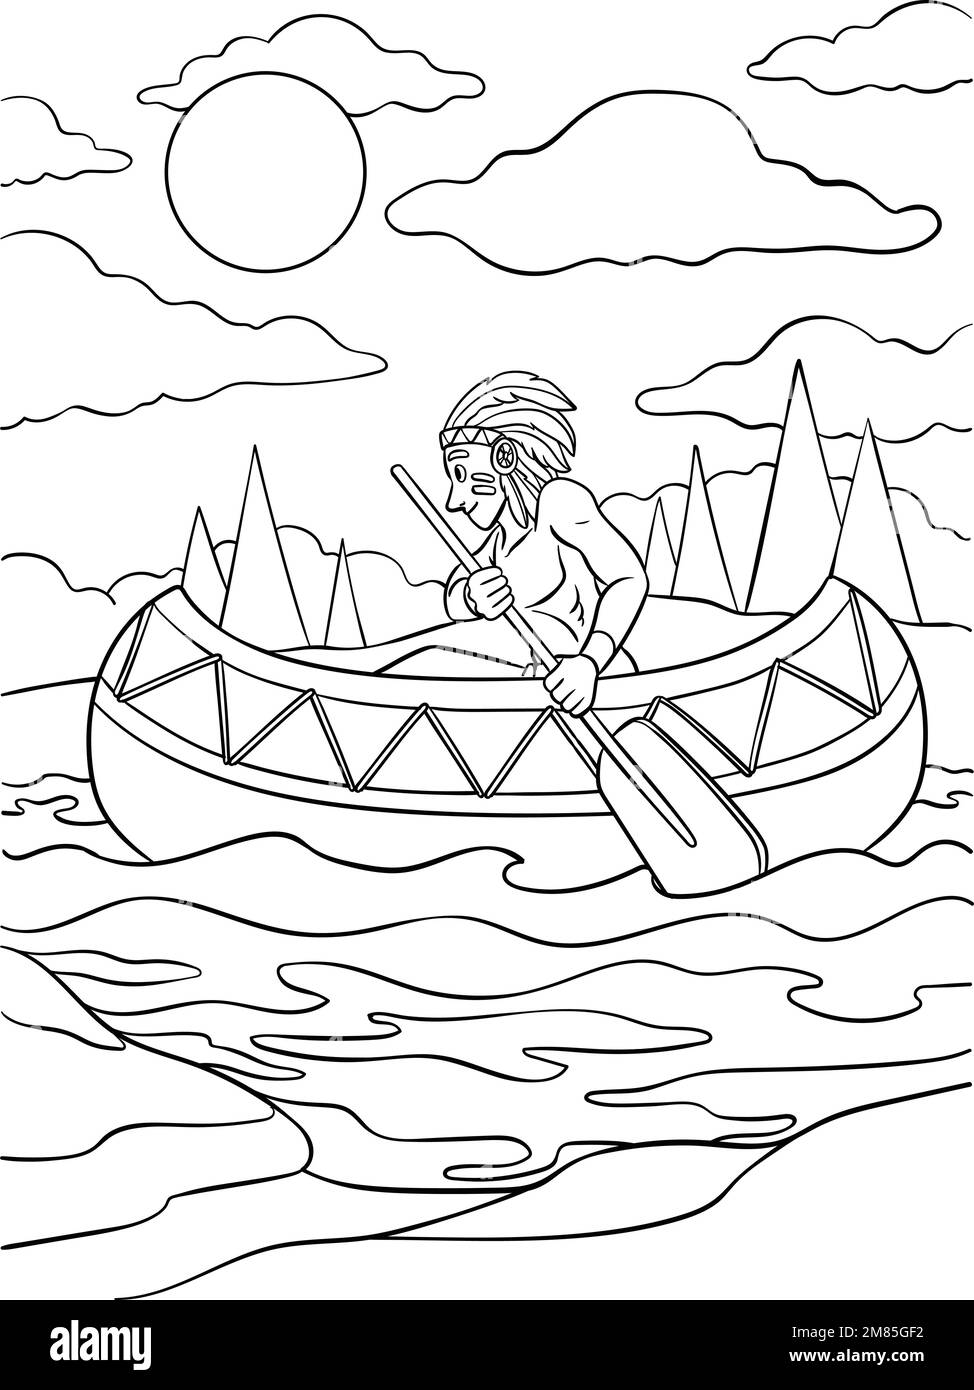 Native American Indian Canoe Coloring Page  Stock Vector